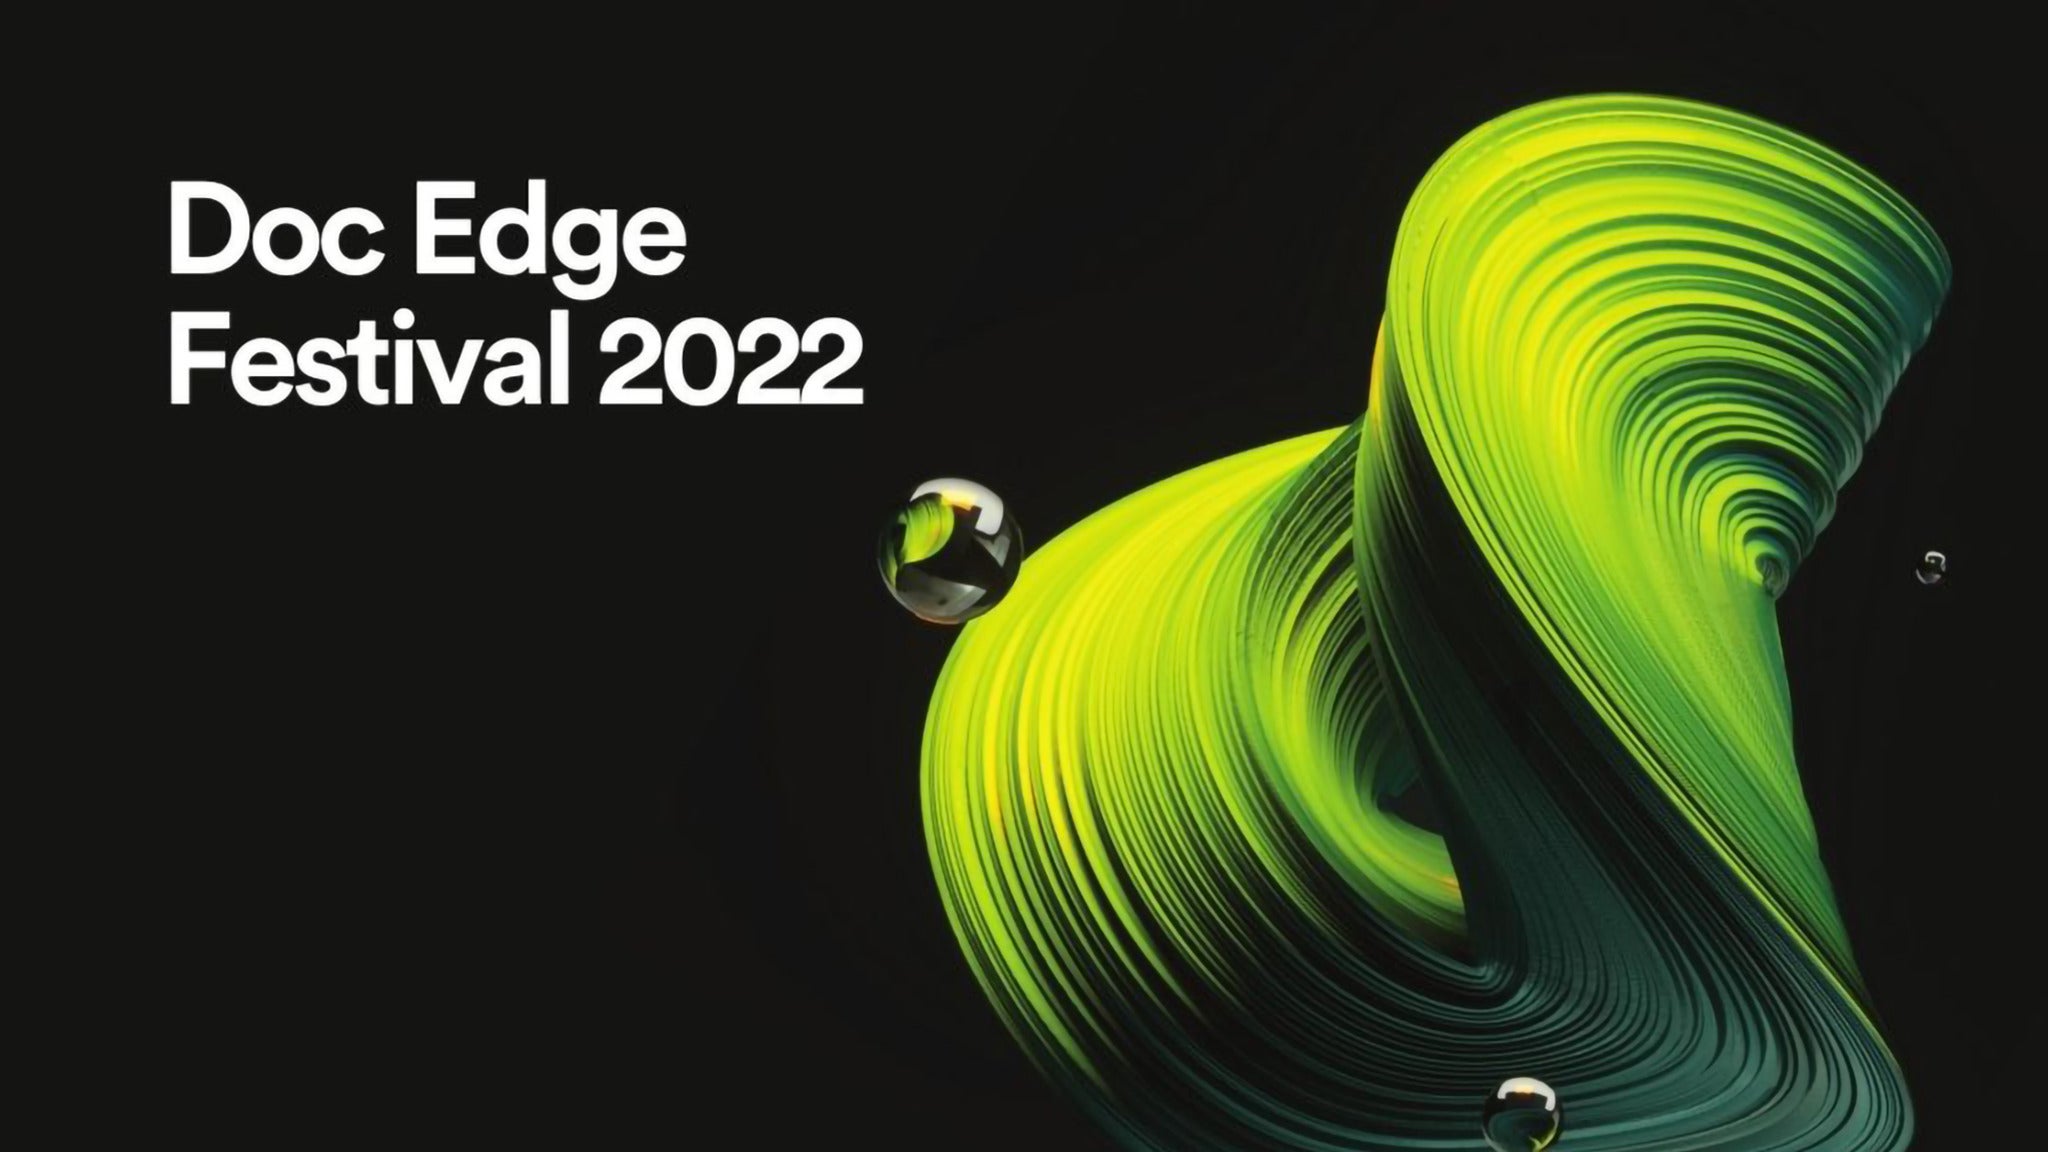 Image used with permission from Ticketmaster | Doc Edge Festival 2022: All That Breathes tickets